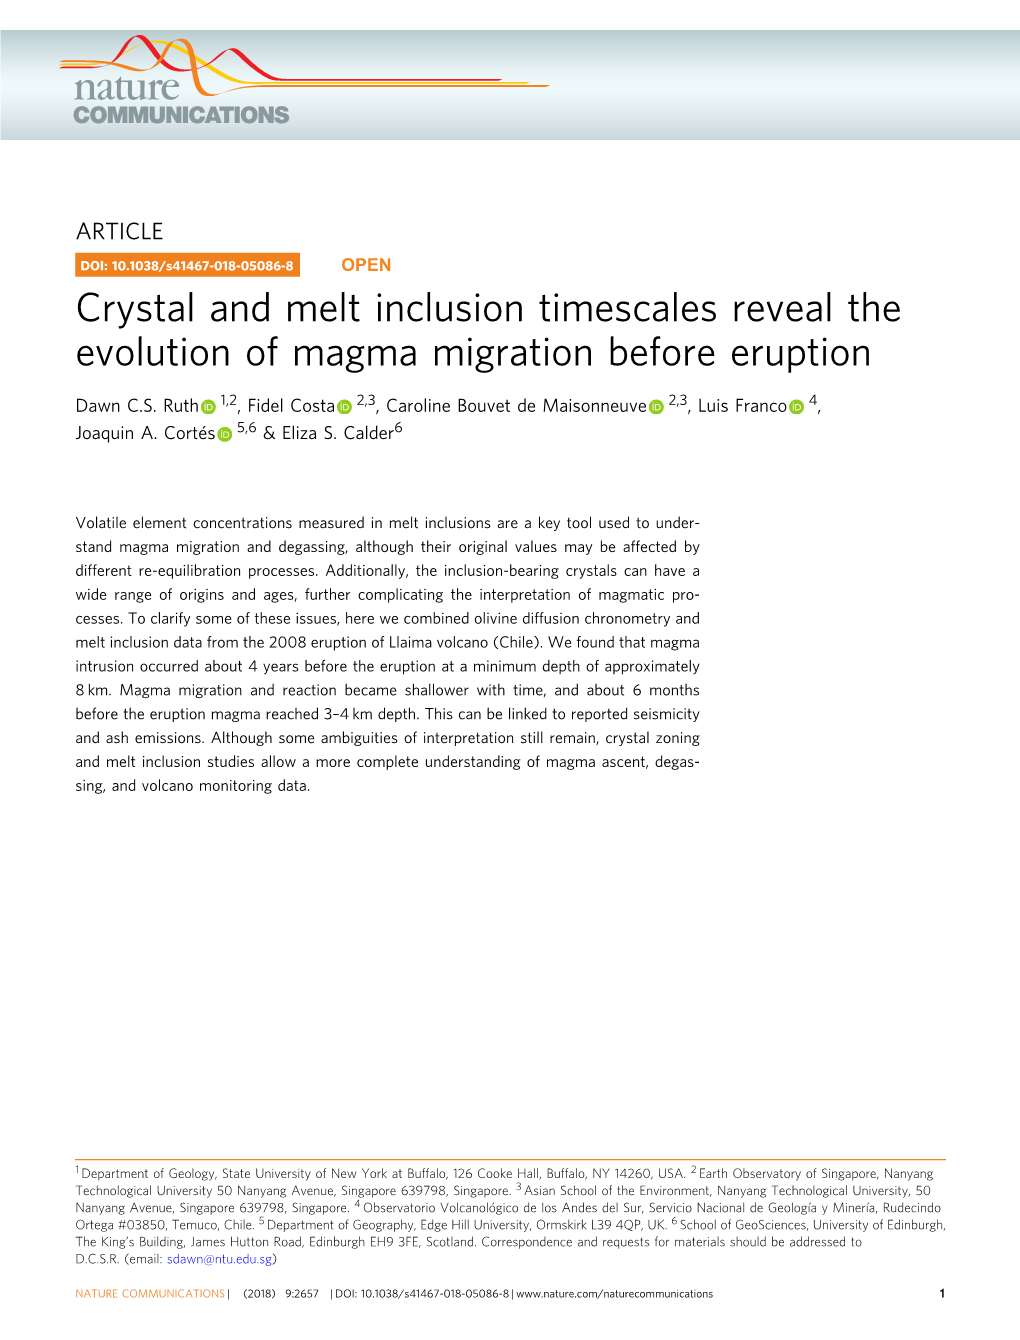 Crystal and Melt Inclusion Timescales Reveal the Evolution of Magma Migration Before Eruption